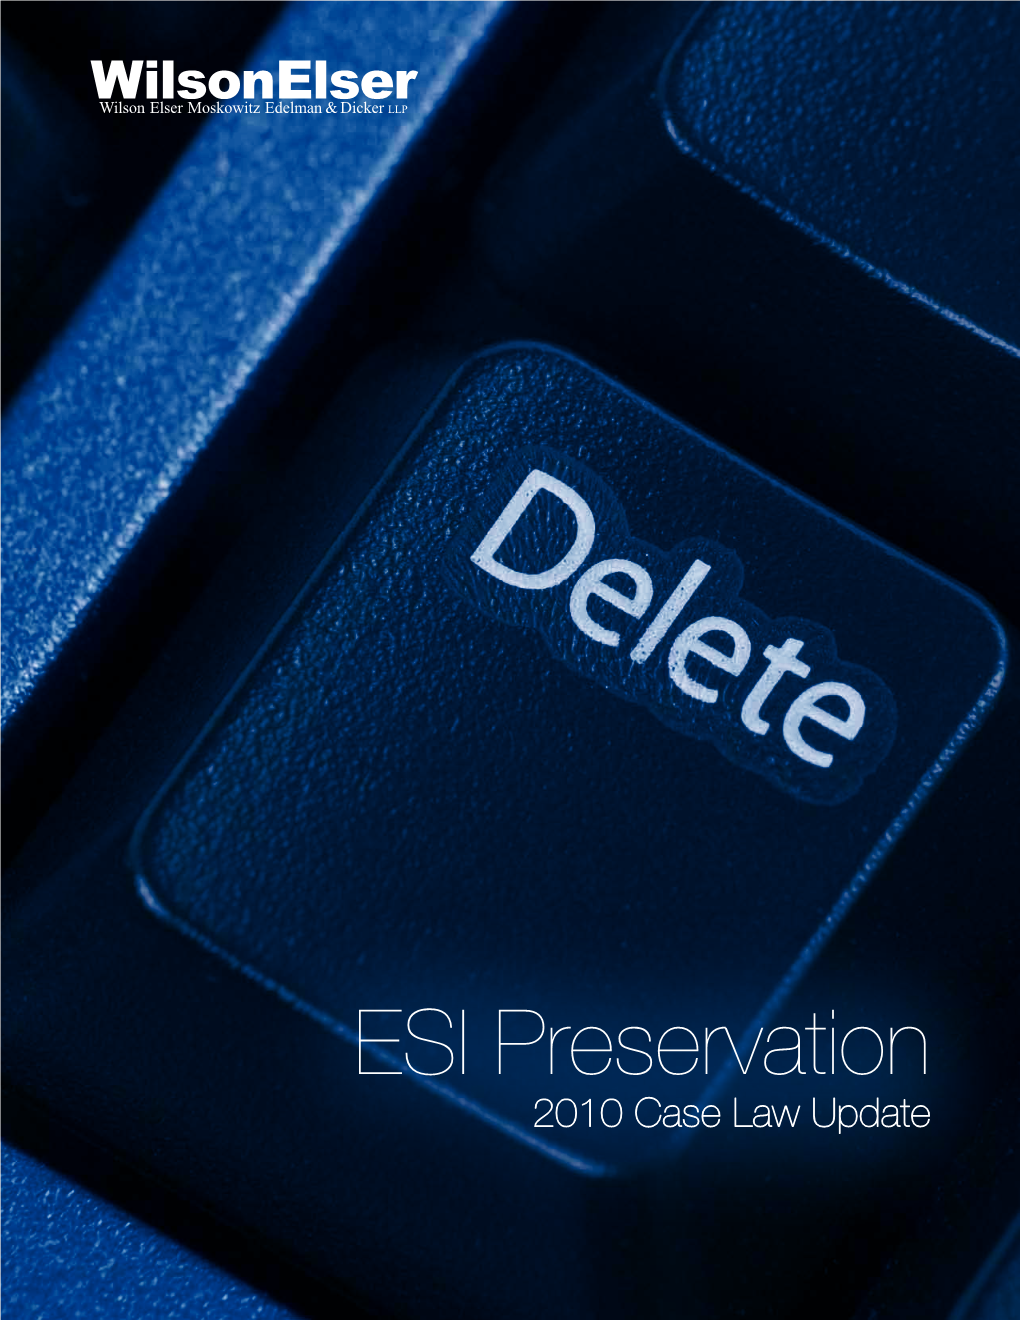 ESI Preservation 2010 Case Law Update Contents